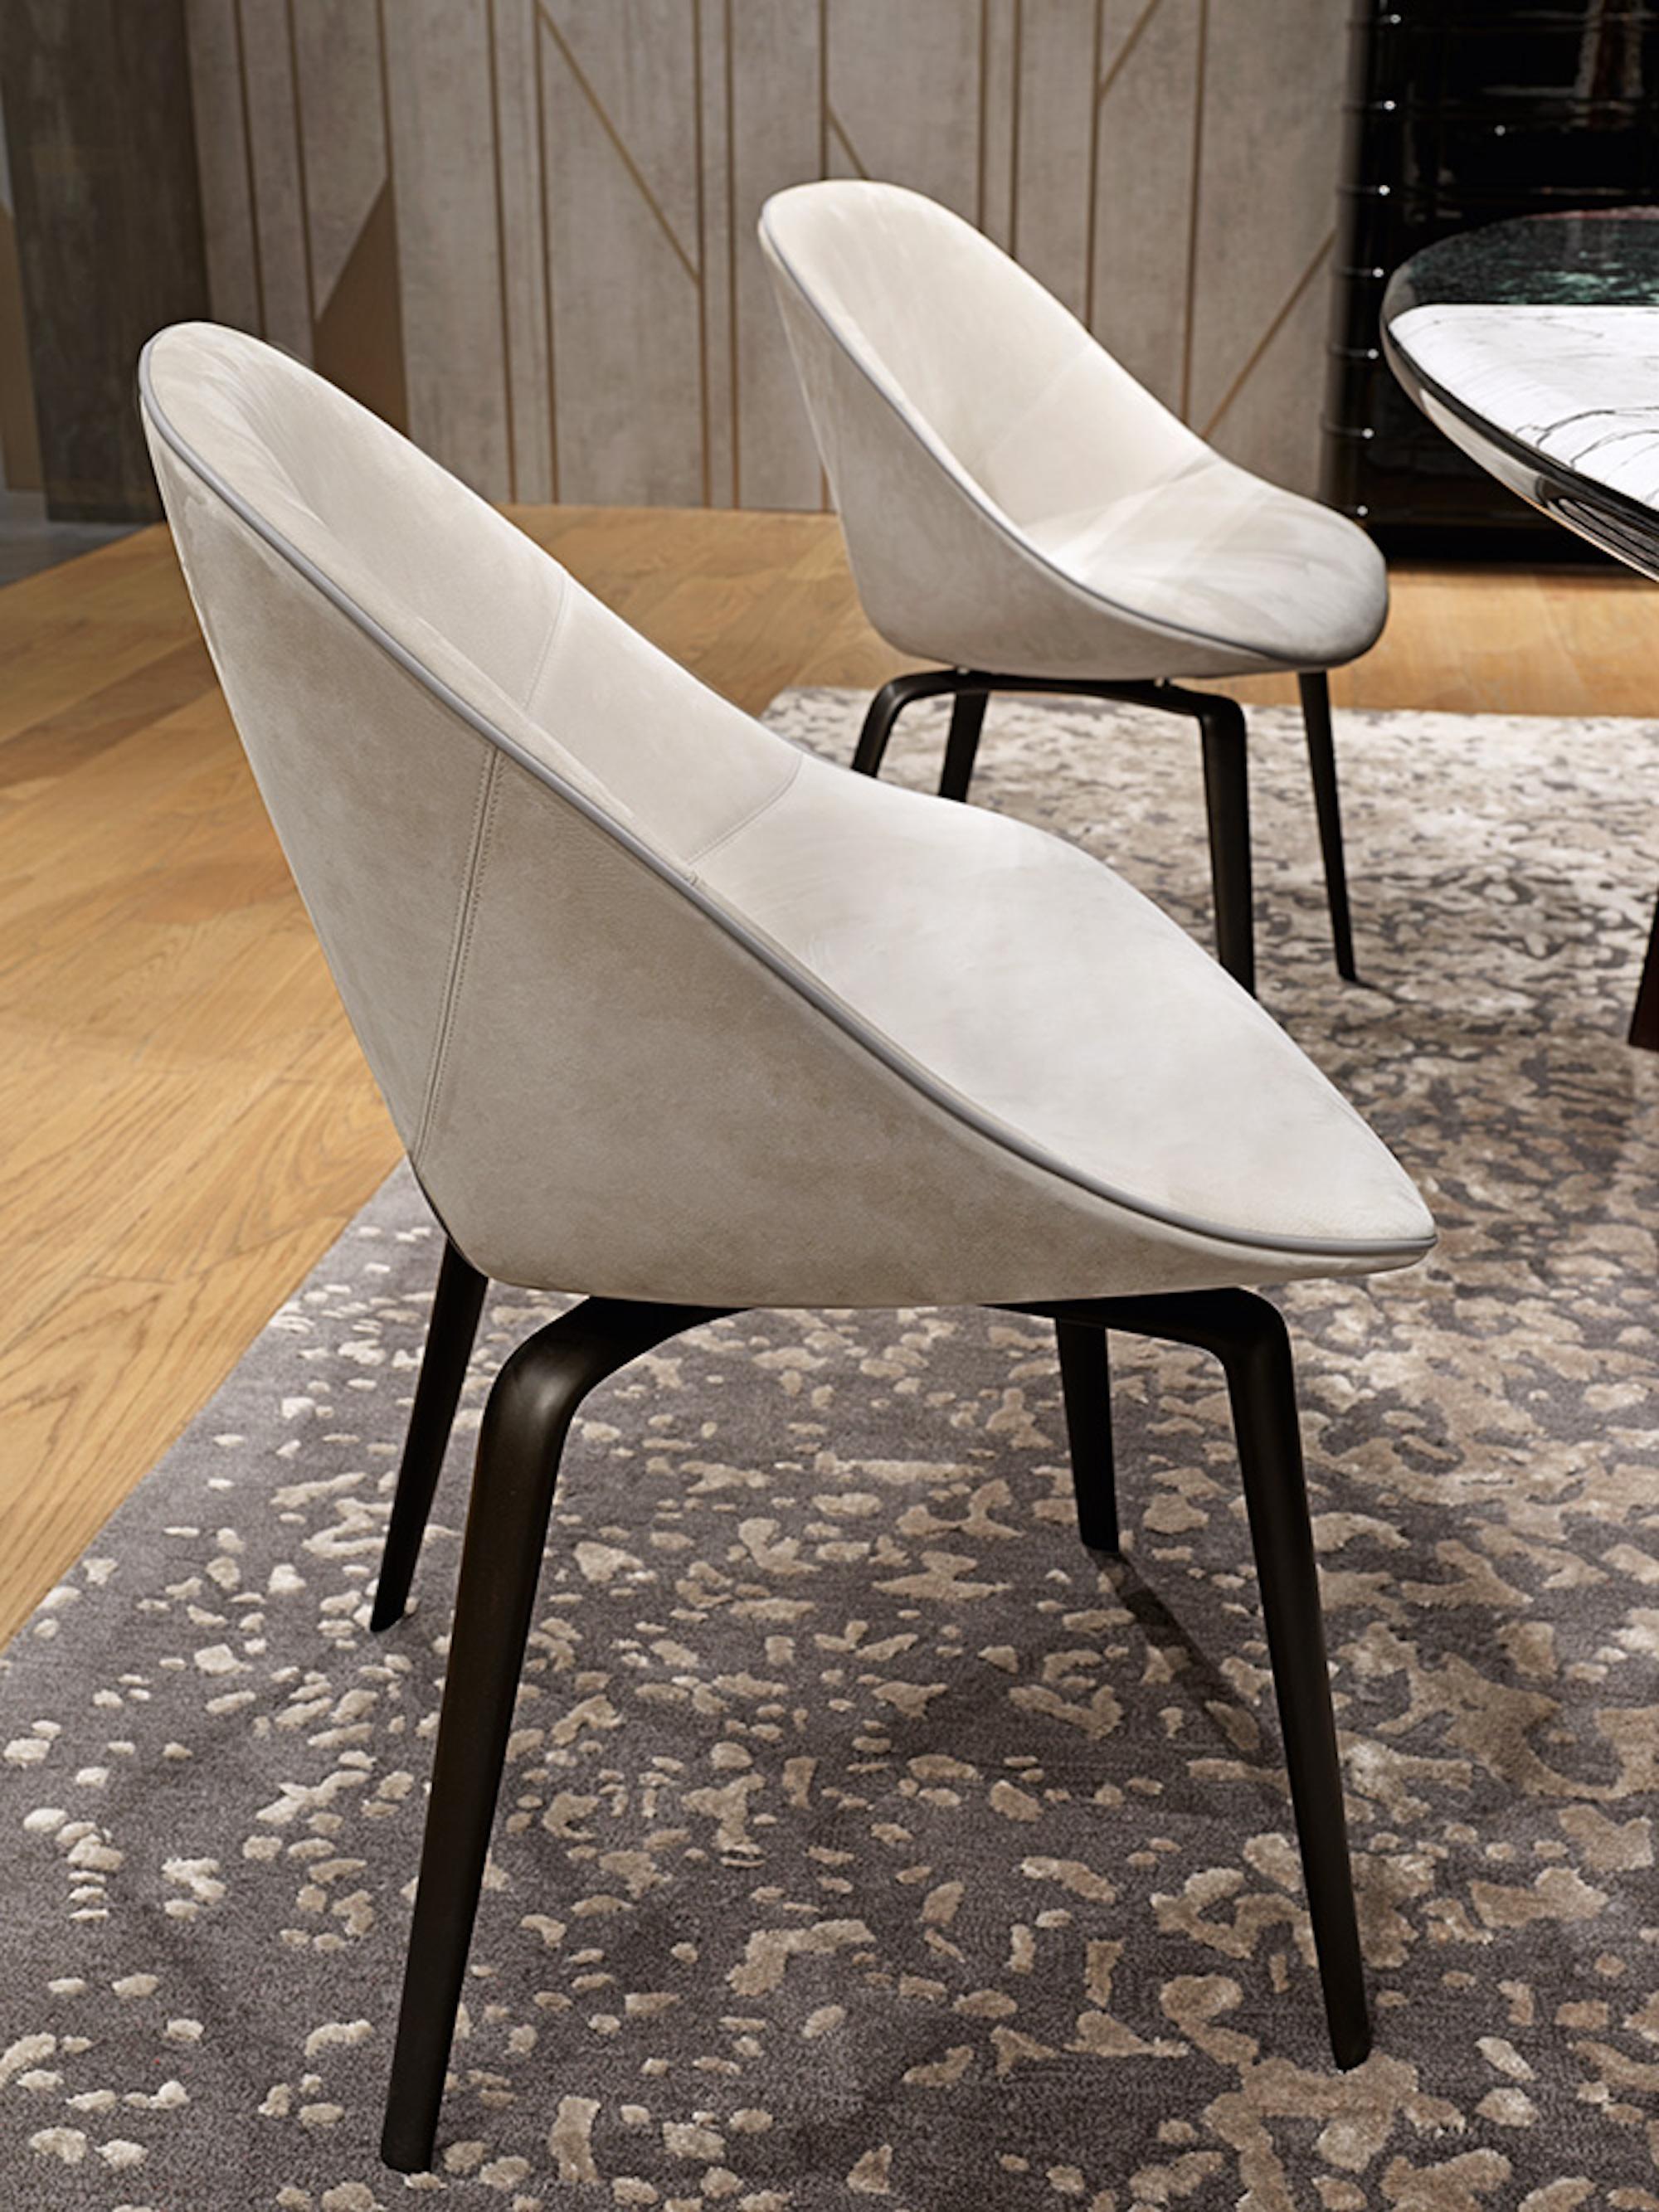 Italian Visionnaire Tanya Armchair with Aluminum Legs and Foam Seat by Roberto Lazzeroni